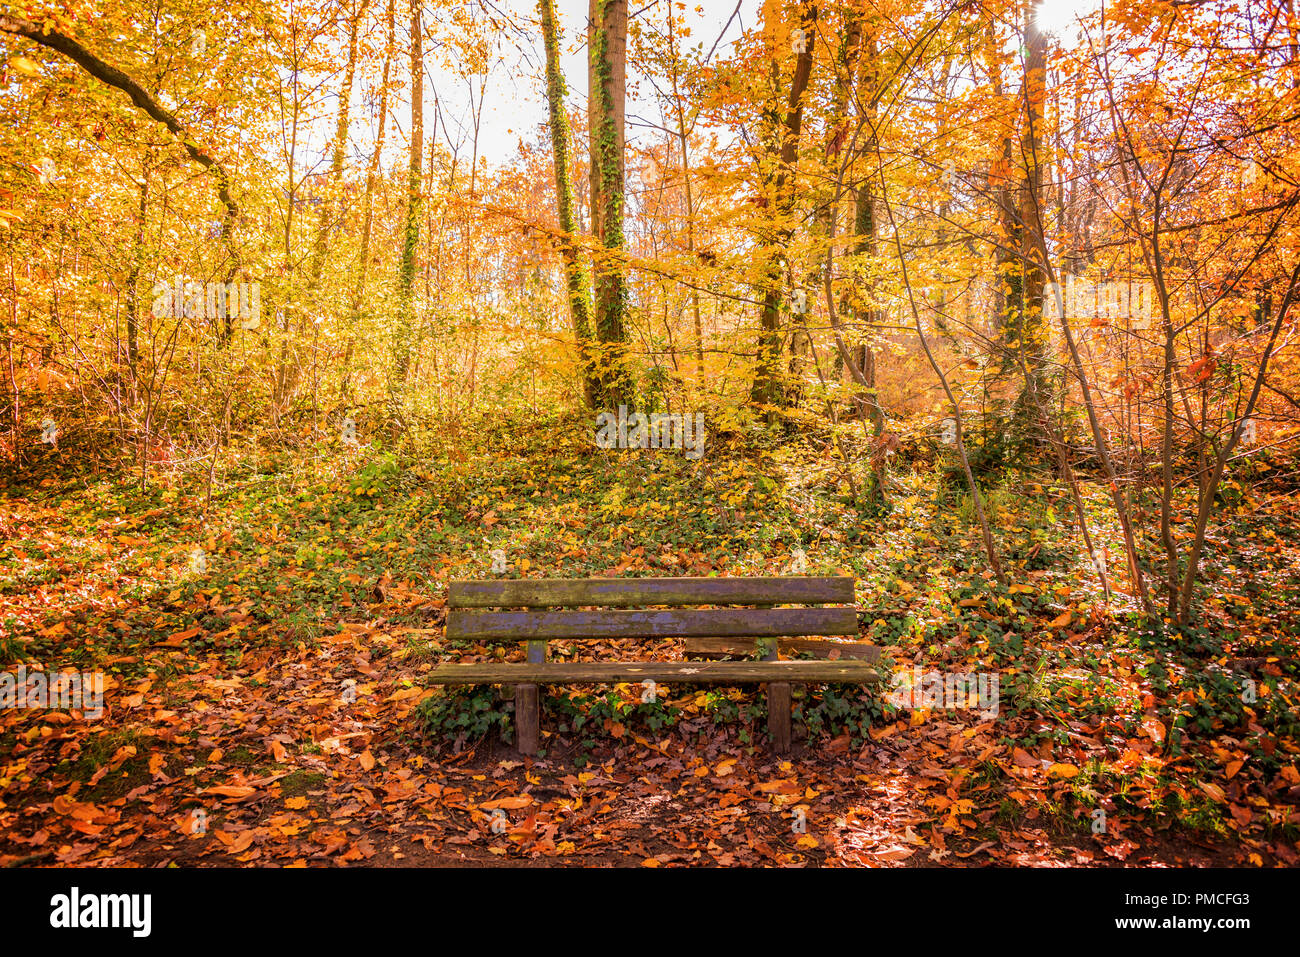 Wooden bench in a forest in autumn Stock Photo